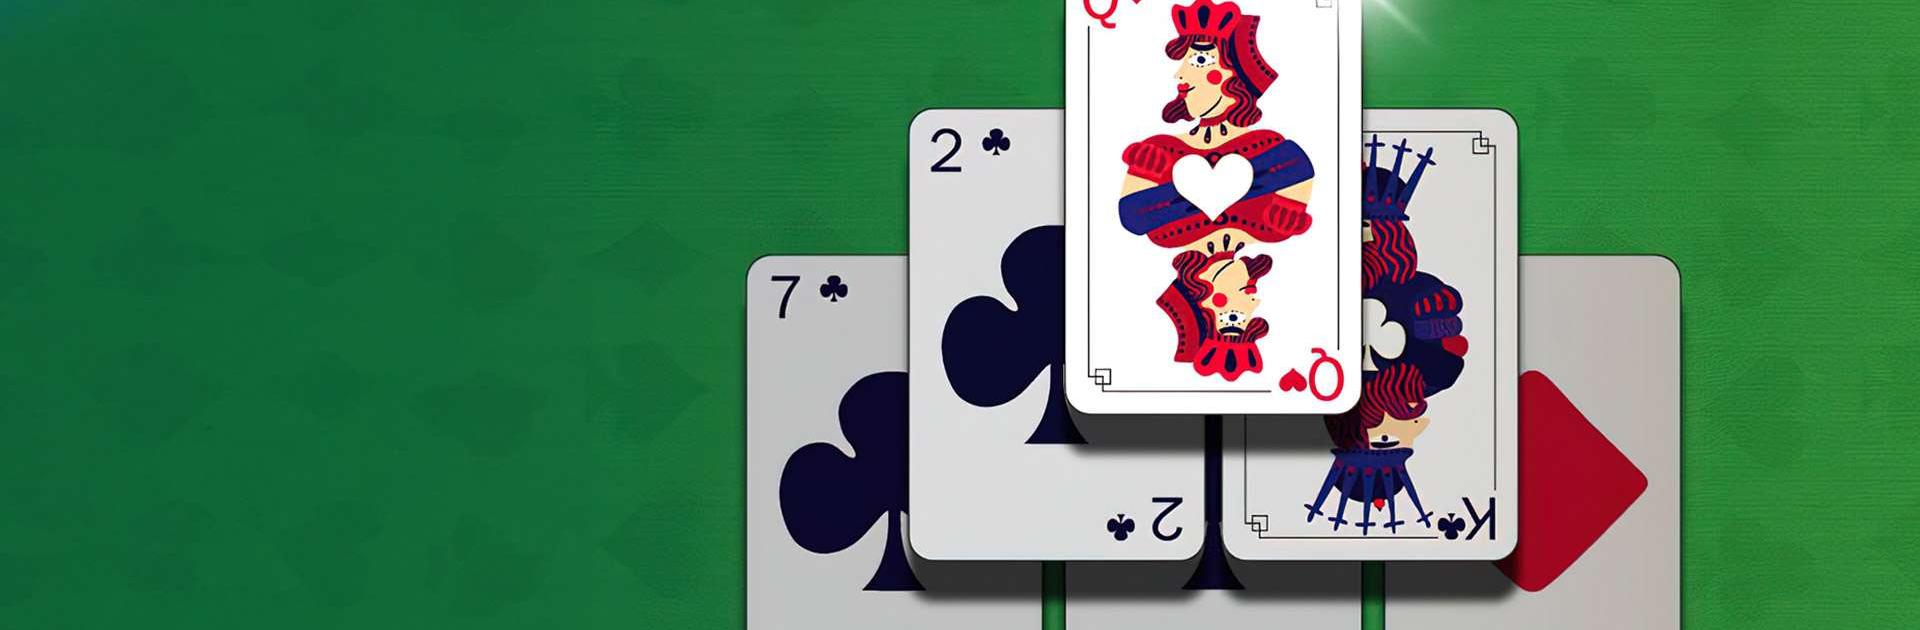 Play Master Pyramid Solitaire Online